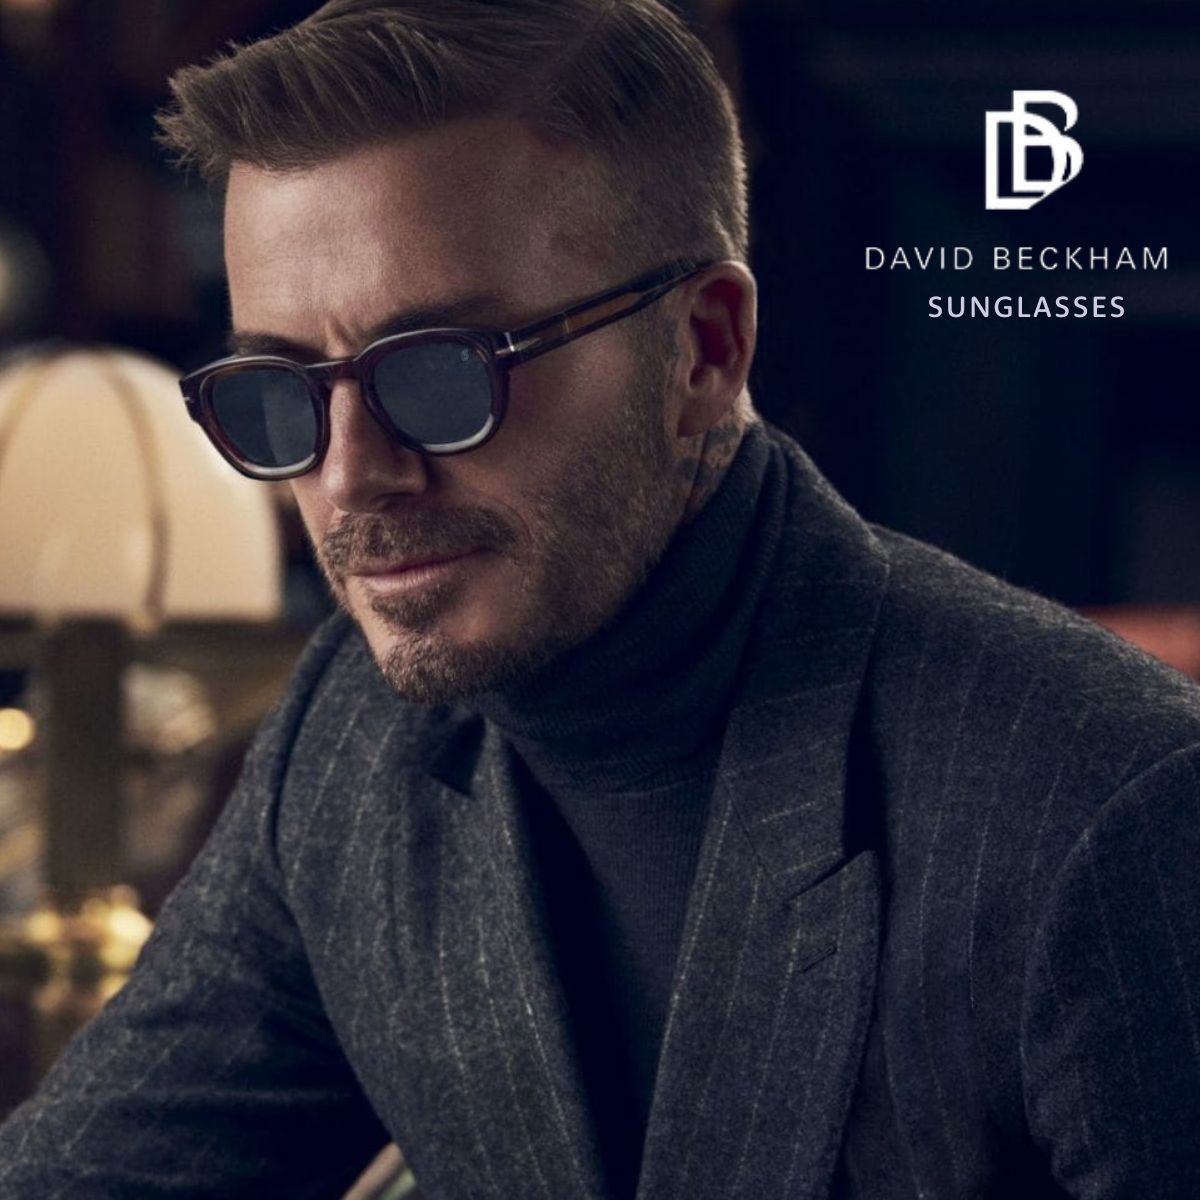 "Explore the latest David Beckham Sunglasses collections for men and women at Optorium. Find trendiest shades, goggles, and fashionable eyewear. Shop now for top-rated styles and exclusive selections."